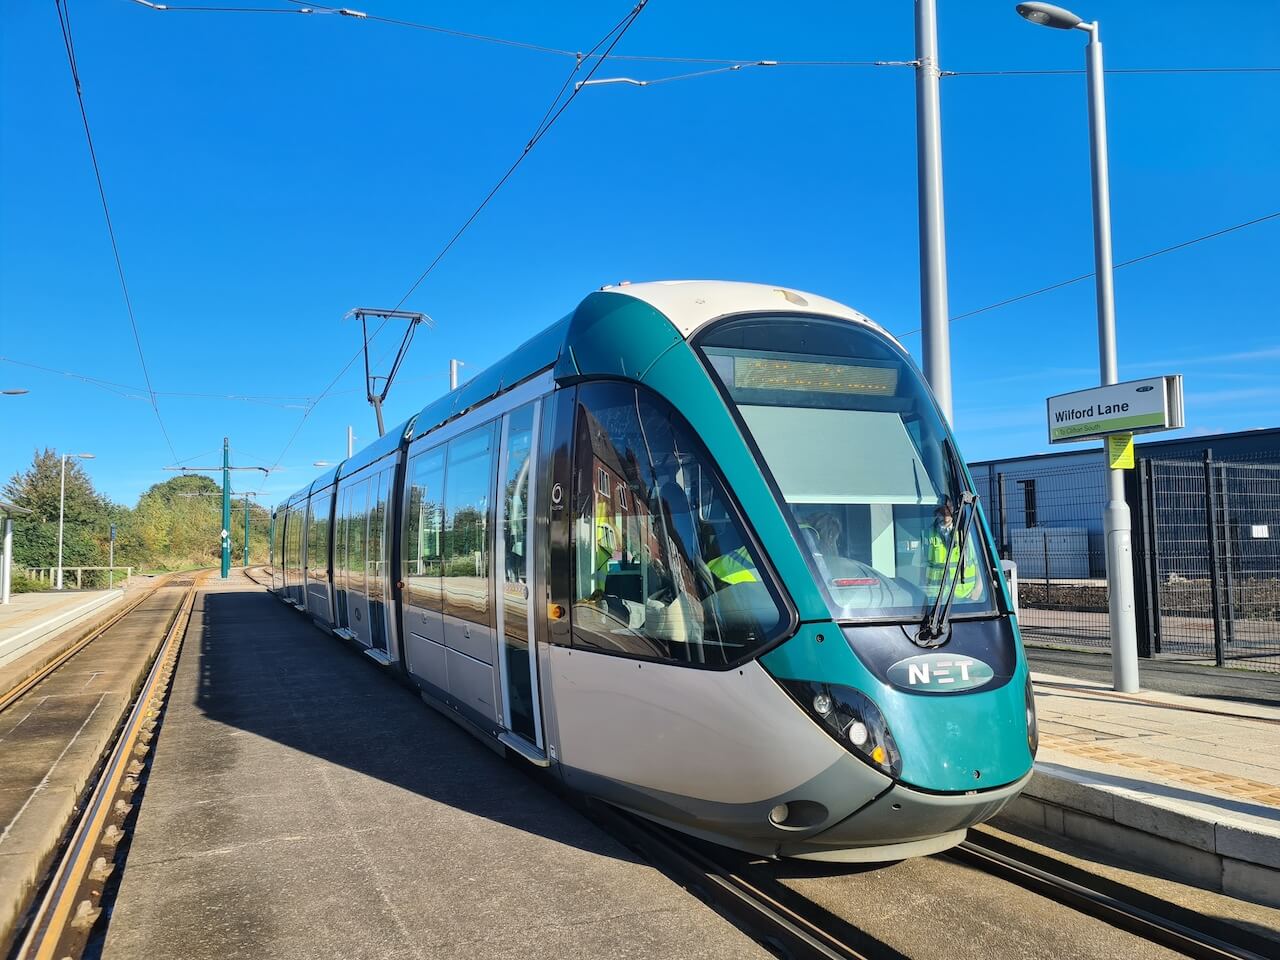 A tram at the Wilford Lane stop.